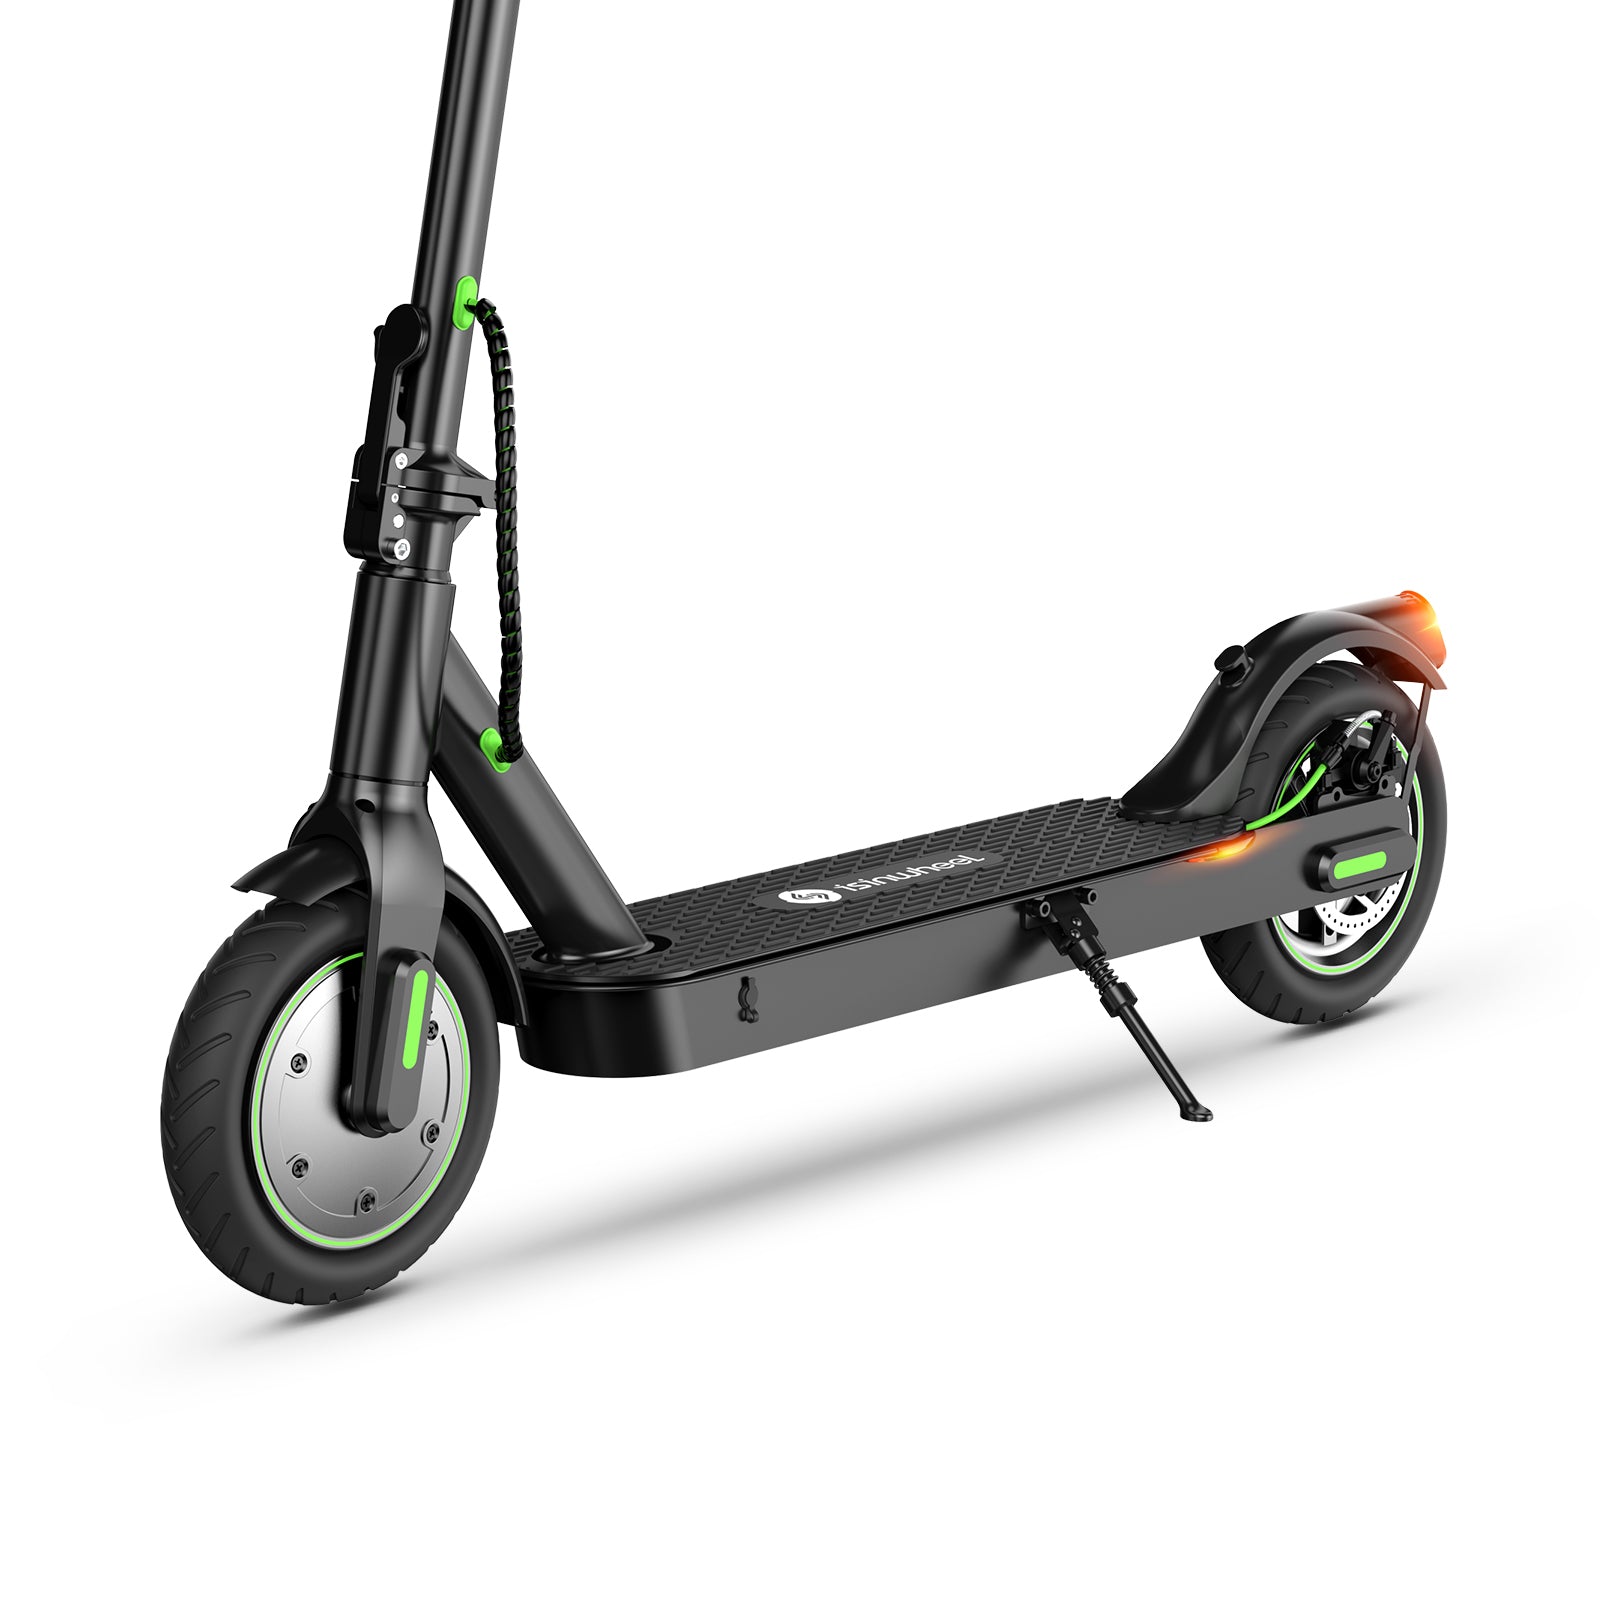 isinwheel S9 Pro Pneumatic Tire Electric Scooter Deck